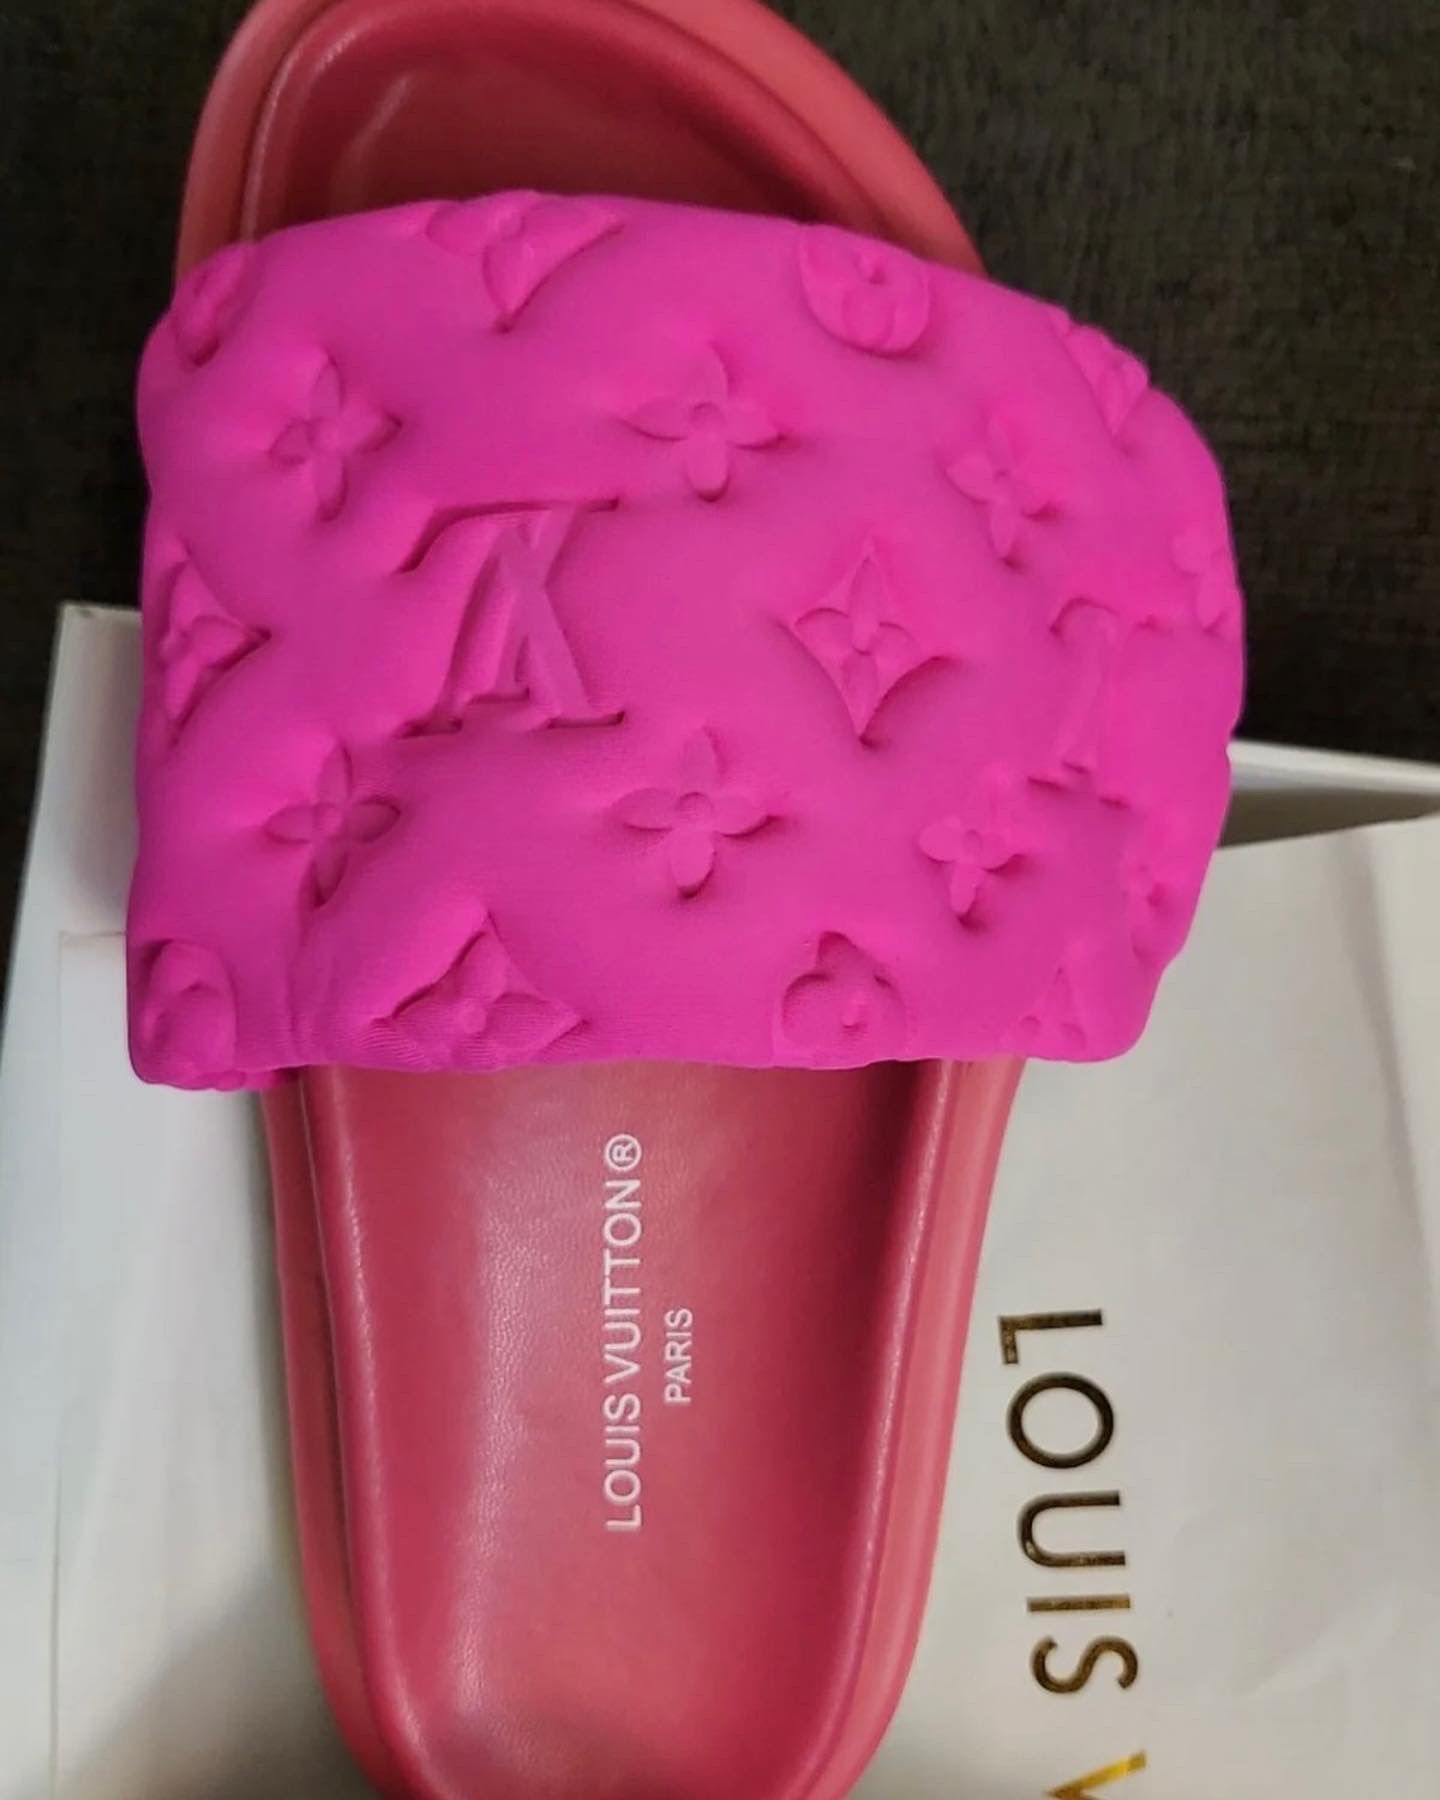 Louis Vuitton, Shoes, Lv Pillow Slides In Bright Pink